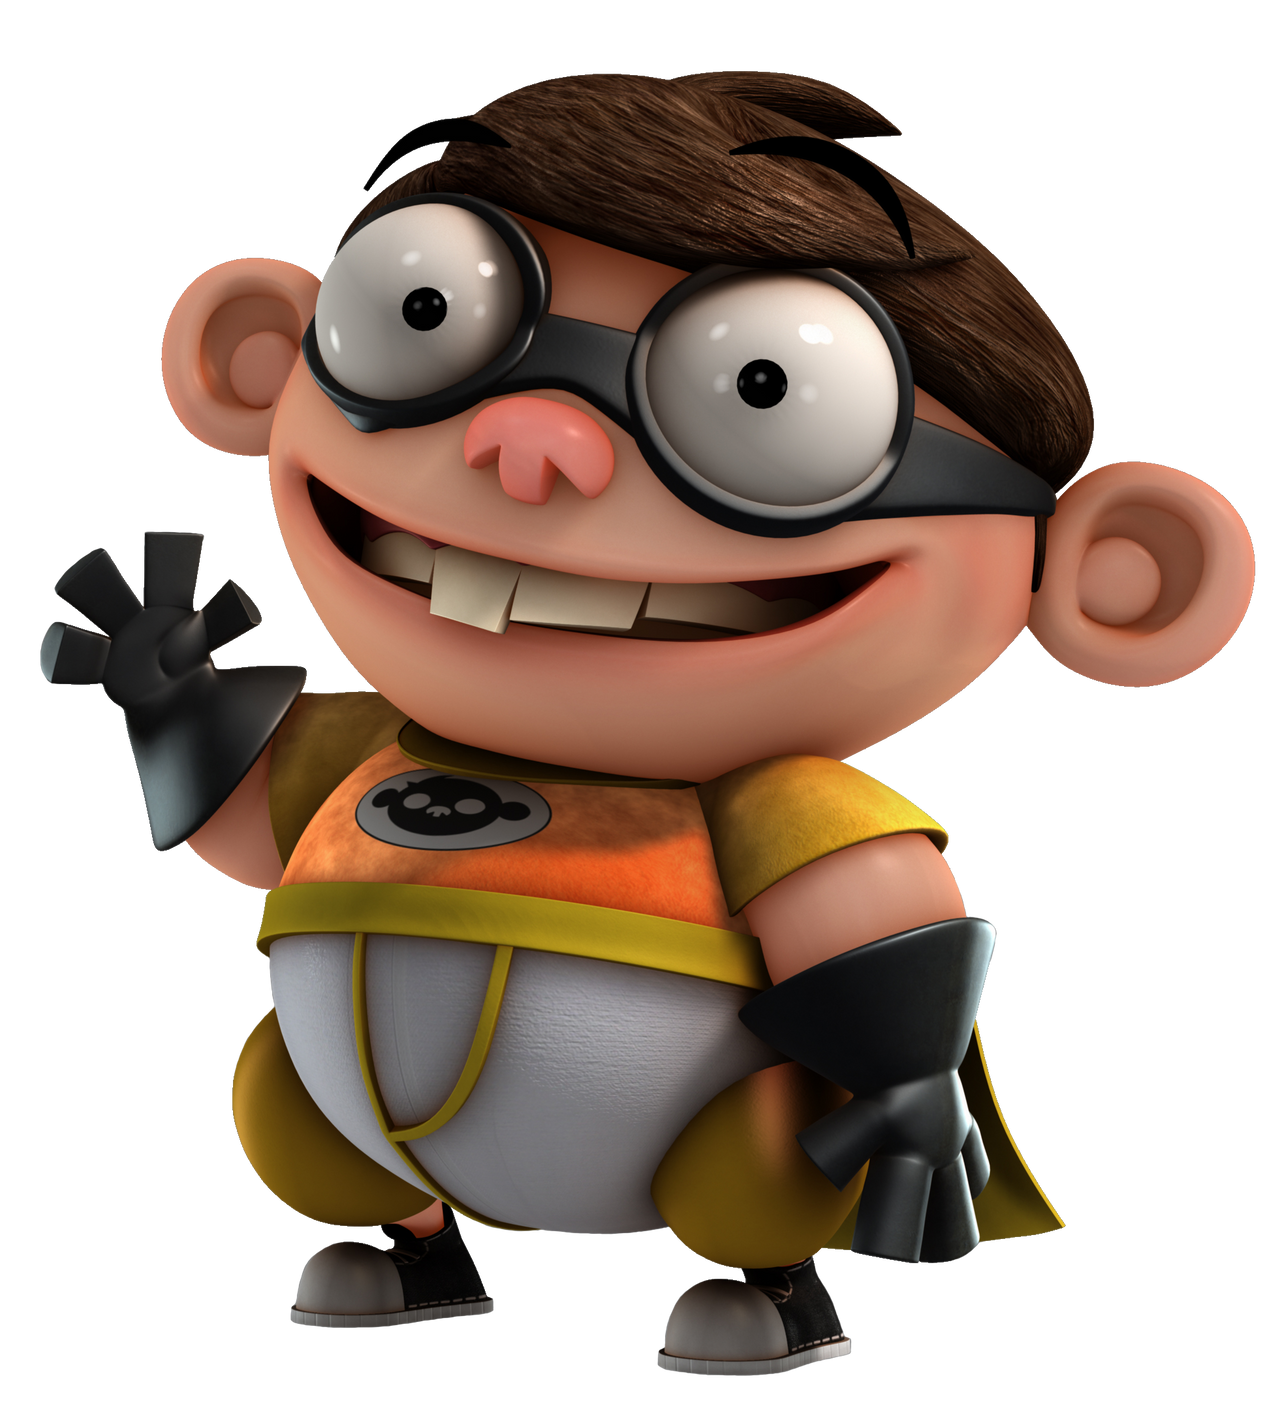 Fanboy (Fanboy and Chum Chum) by NALCE on DeviantArt